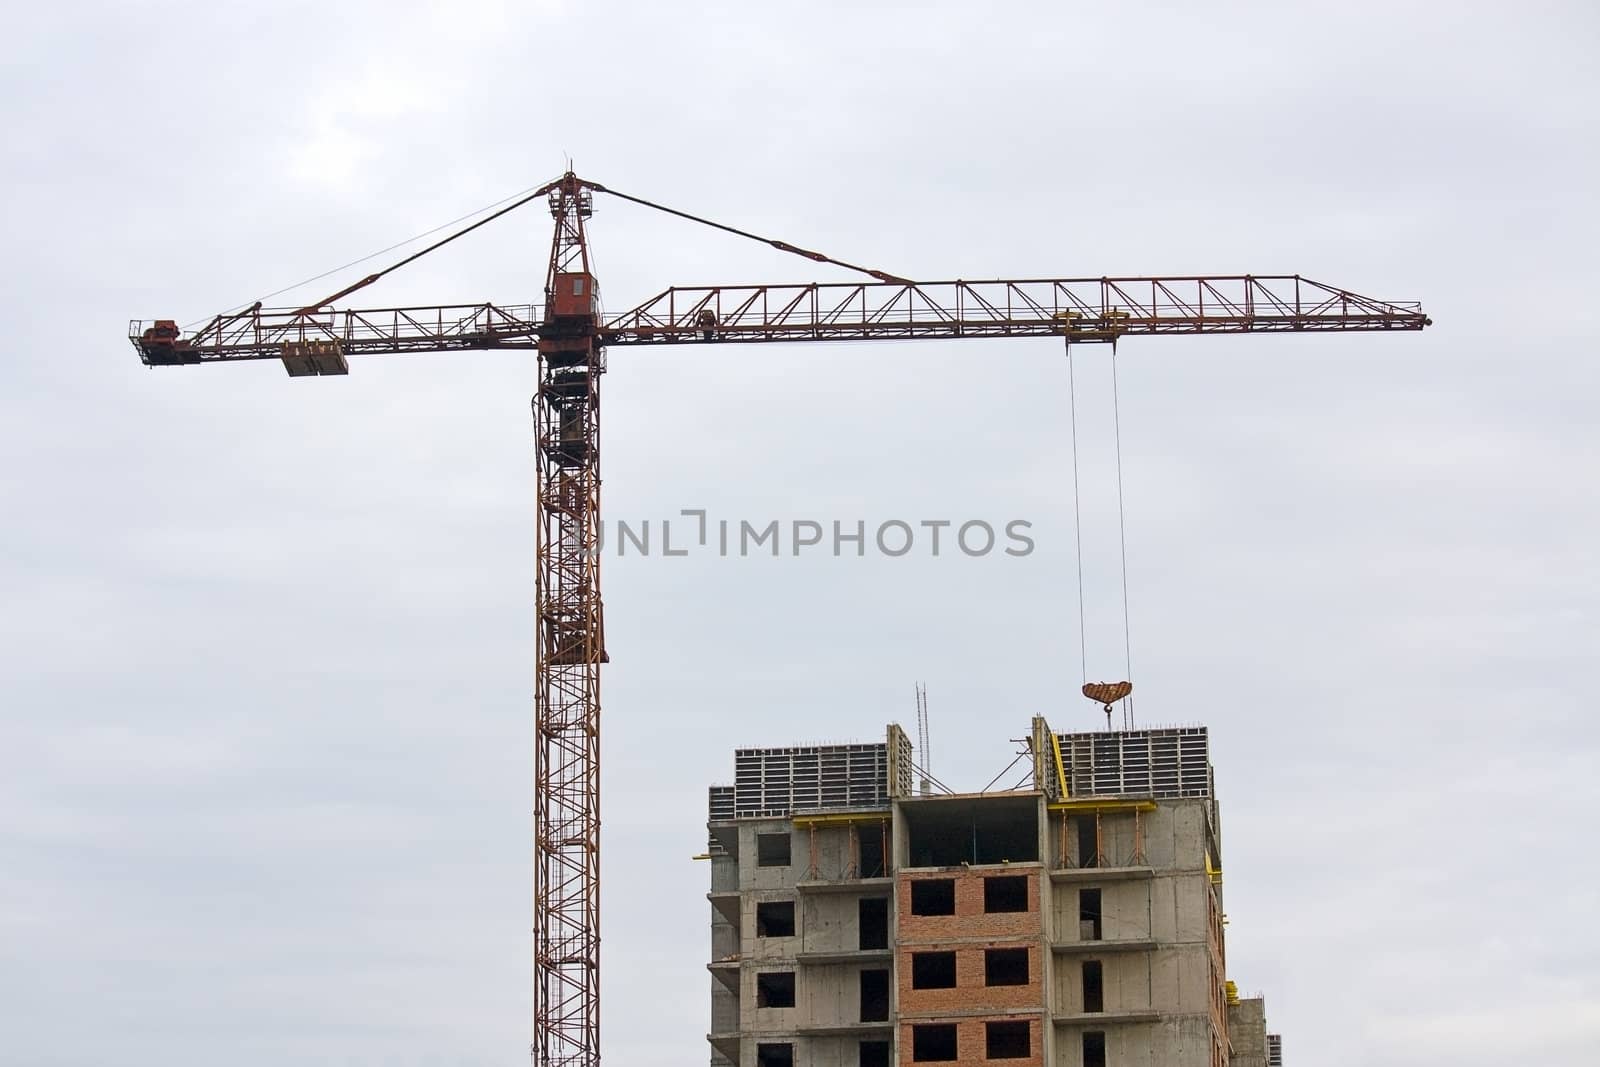 Tower crane near the house under construction on the background of a cloudy sky